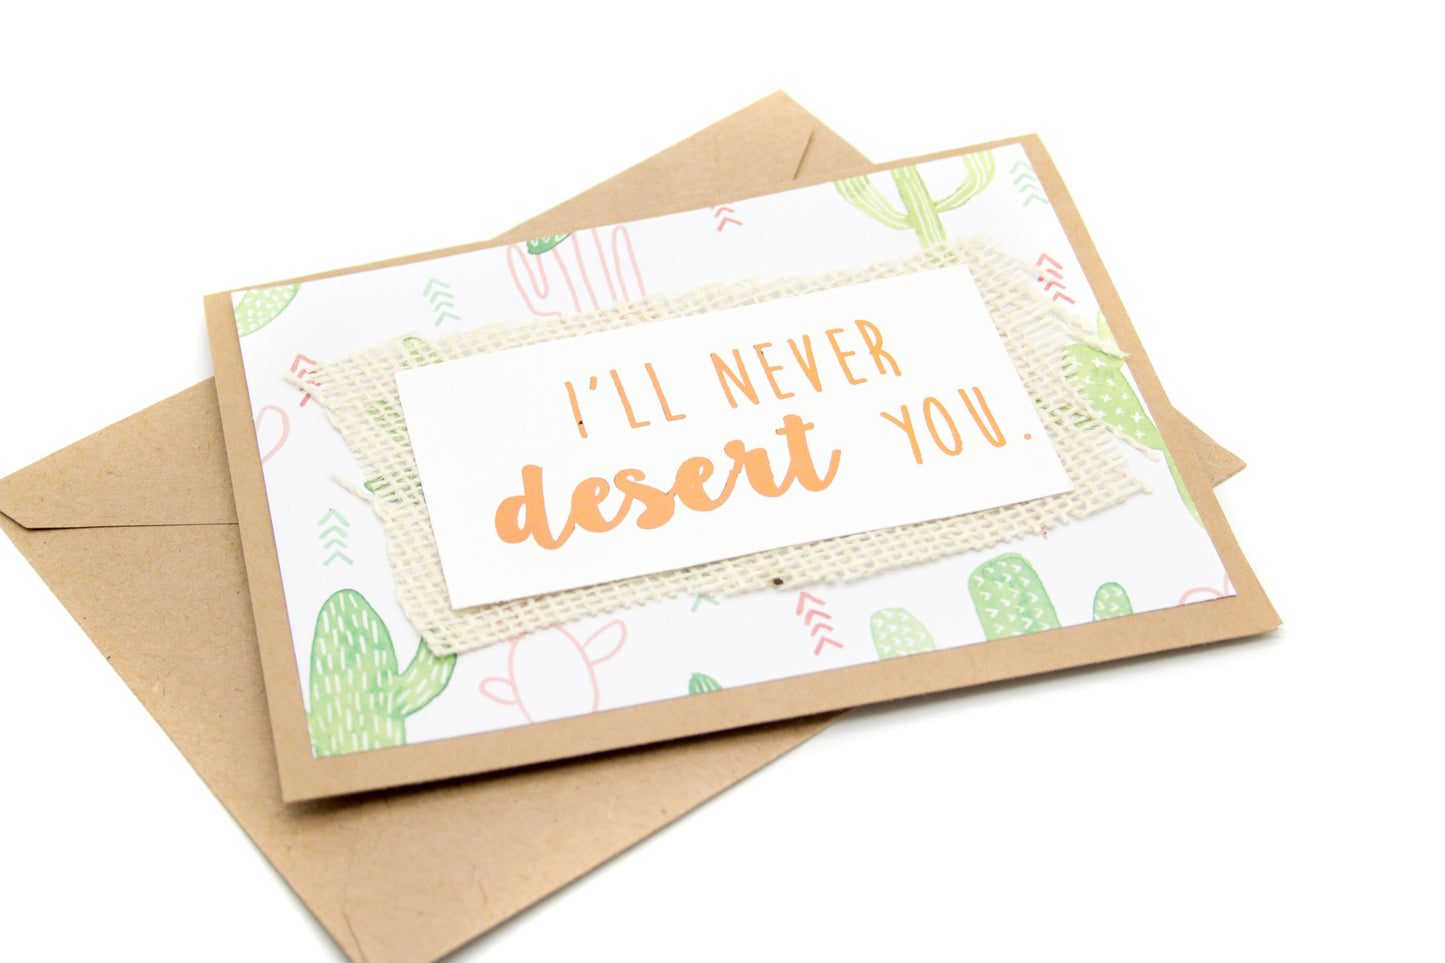 Handmade "I'll Never Desert You." Copper Foil Embossed Card on Cactus Print - Greeting Card made from Card stock